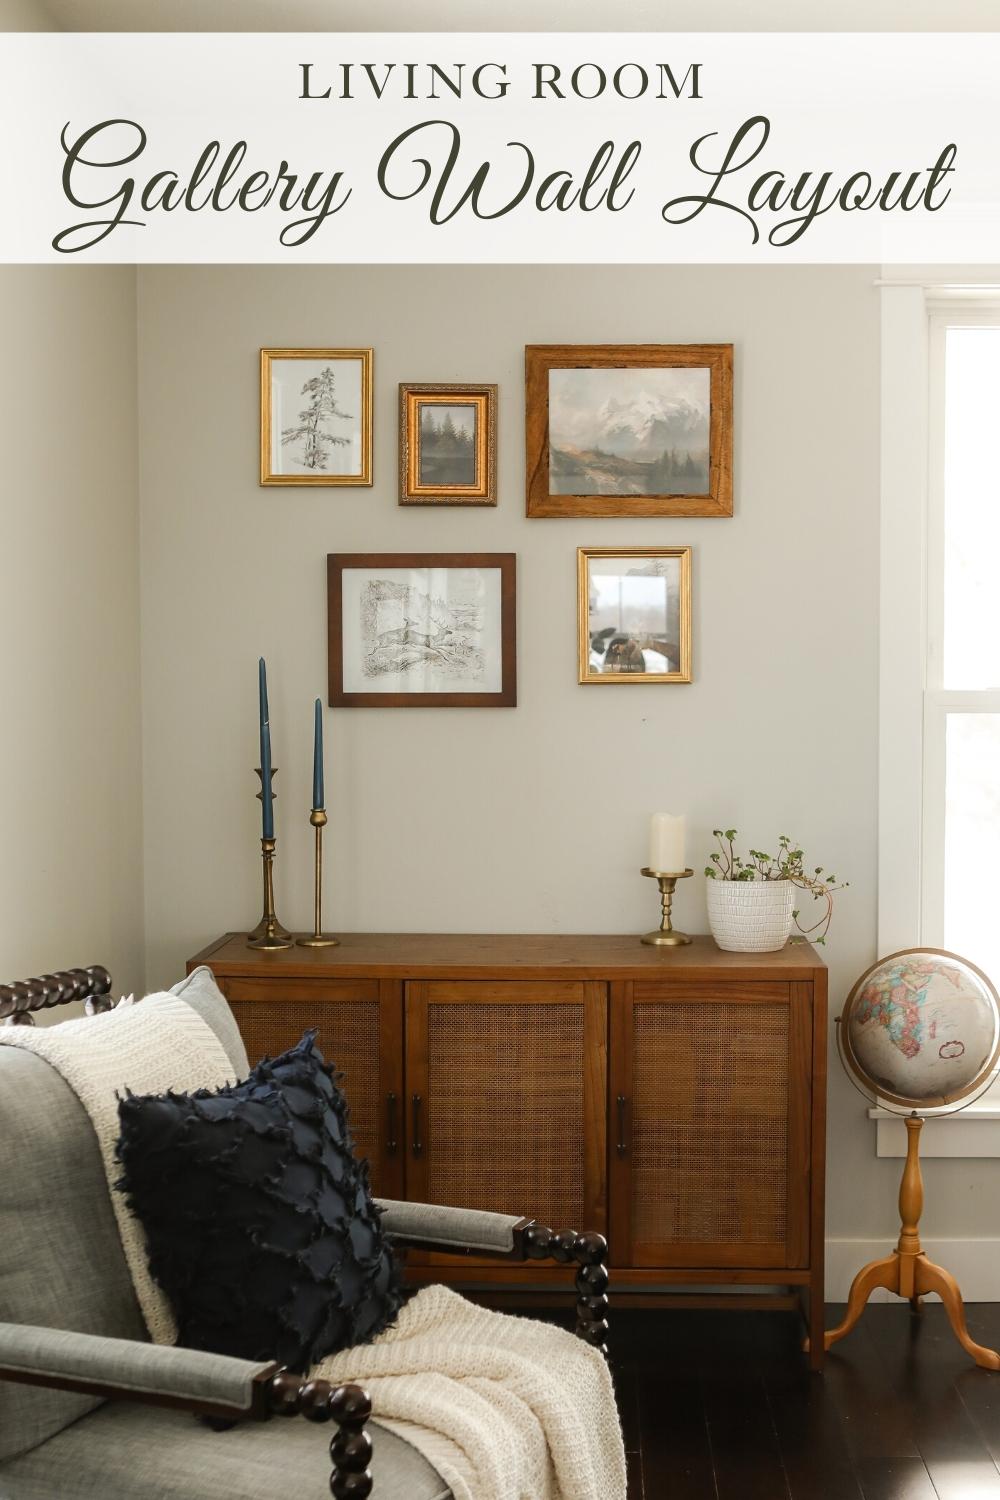 How to hang a gallery wall with living room gallery wall layout